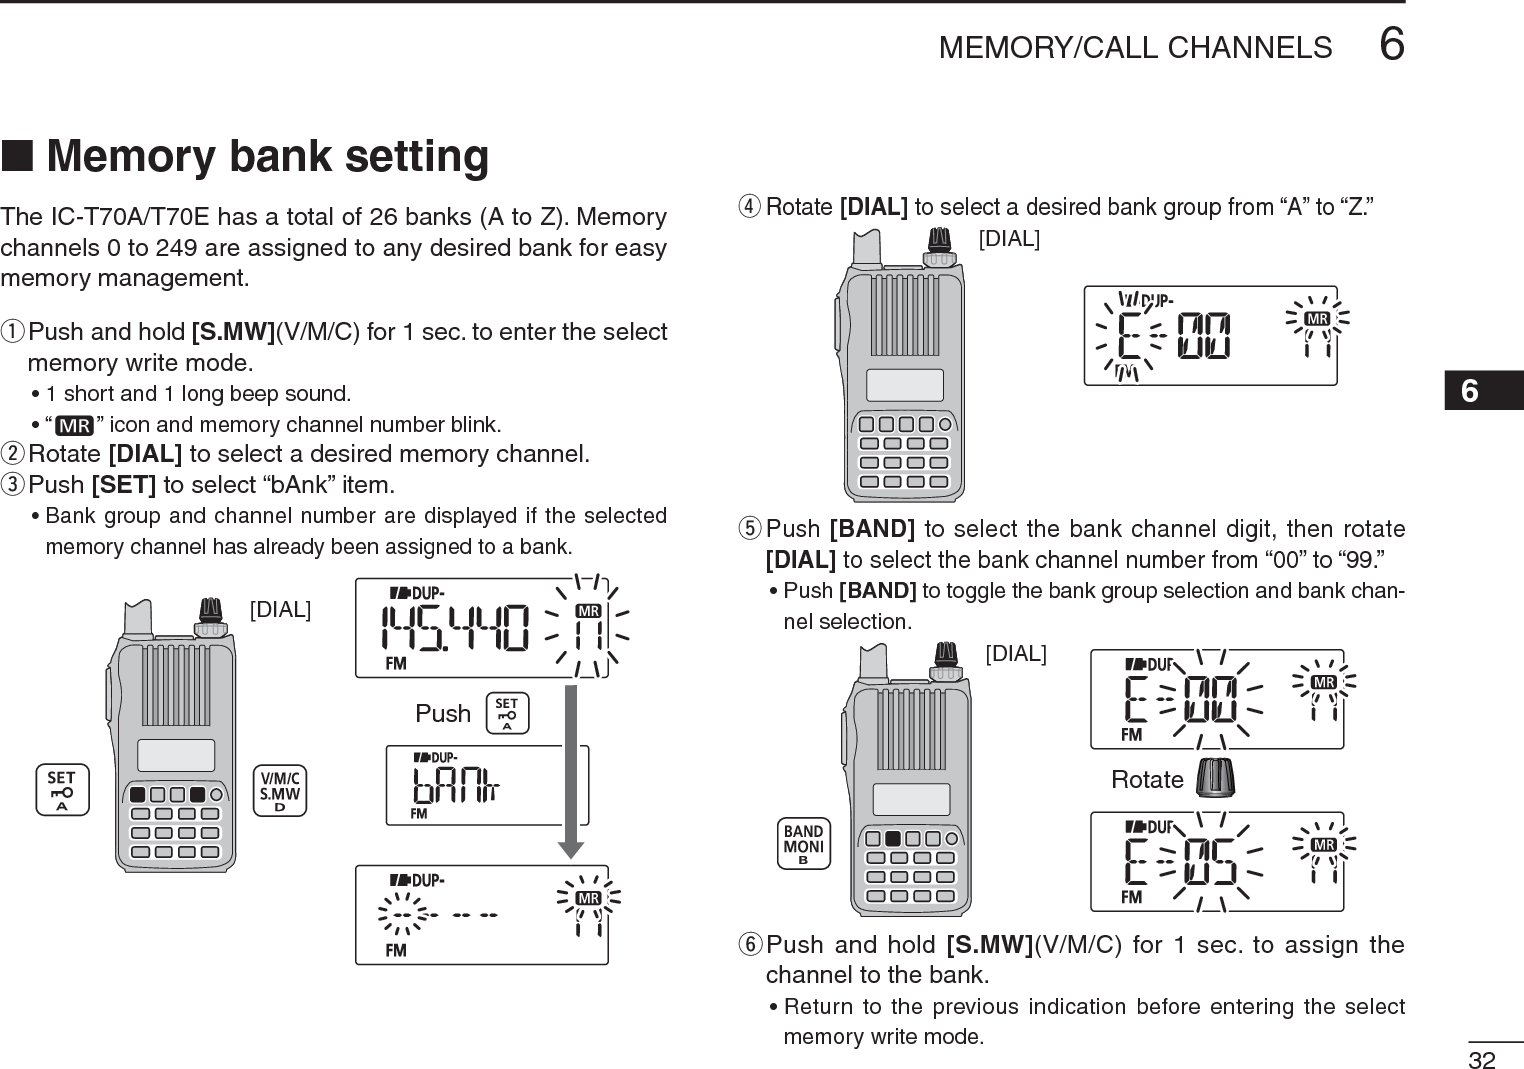 326MEMORY/CALL CHANNELS12345678910111213141516171819N Memory bank settingThe IC-T70A/T70E has a total of 26 banks (A to Z). Memory channels 0 to 249 are assigned to any desired bank for easy memory management.q  Push and hold [S.MW](V/M/C) for 1 sec. to enter the select memory write mode.• 1 short and 1 long beep sound.•“ ” icon and memory channel number blink.wRotate [DIAL] to select a desired memory channel.e  Push [SET] to select “bAnk” item.• Bank group and channel number are displayed if the selected memory channel has already been assigned to a bank.[DIAL]Pushr  Rotate [DIAL] to select a desired bank group from “A” to “Z.”[DIAL]t  Push [BAND] to select the bank channel digit, then rotate [DIAL] to select the bank channel number from “00” to “99.”• Push [BAND] to toggle the bank group selection and bank chan-nel selection.[DIAL]Rotatey  Push and hold [S.MW](V/M/C) for 1 sec. to assign the channel to the bank.• Return to the previous indication before entering the select memory write mode.